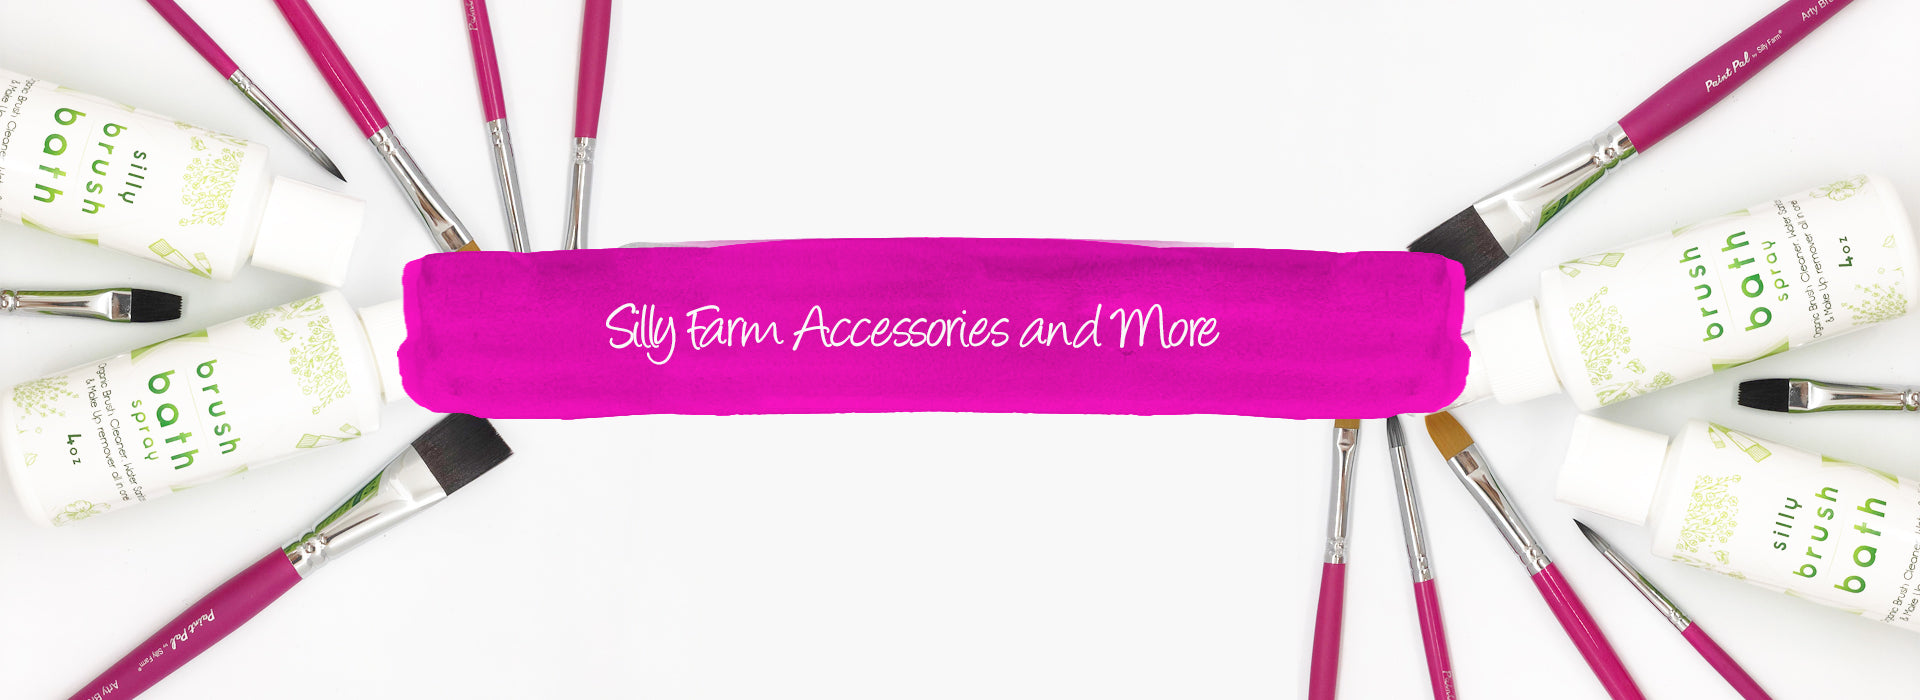 Silly Farm Accessories & More